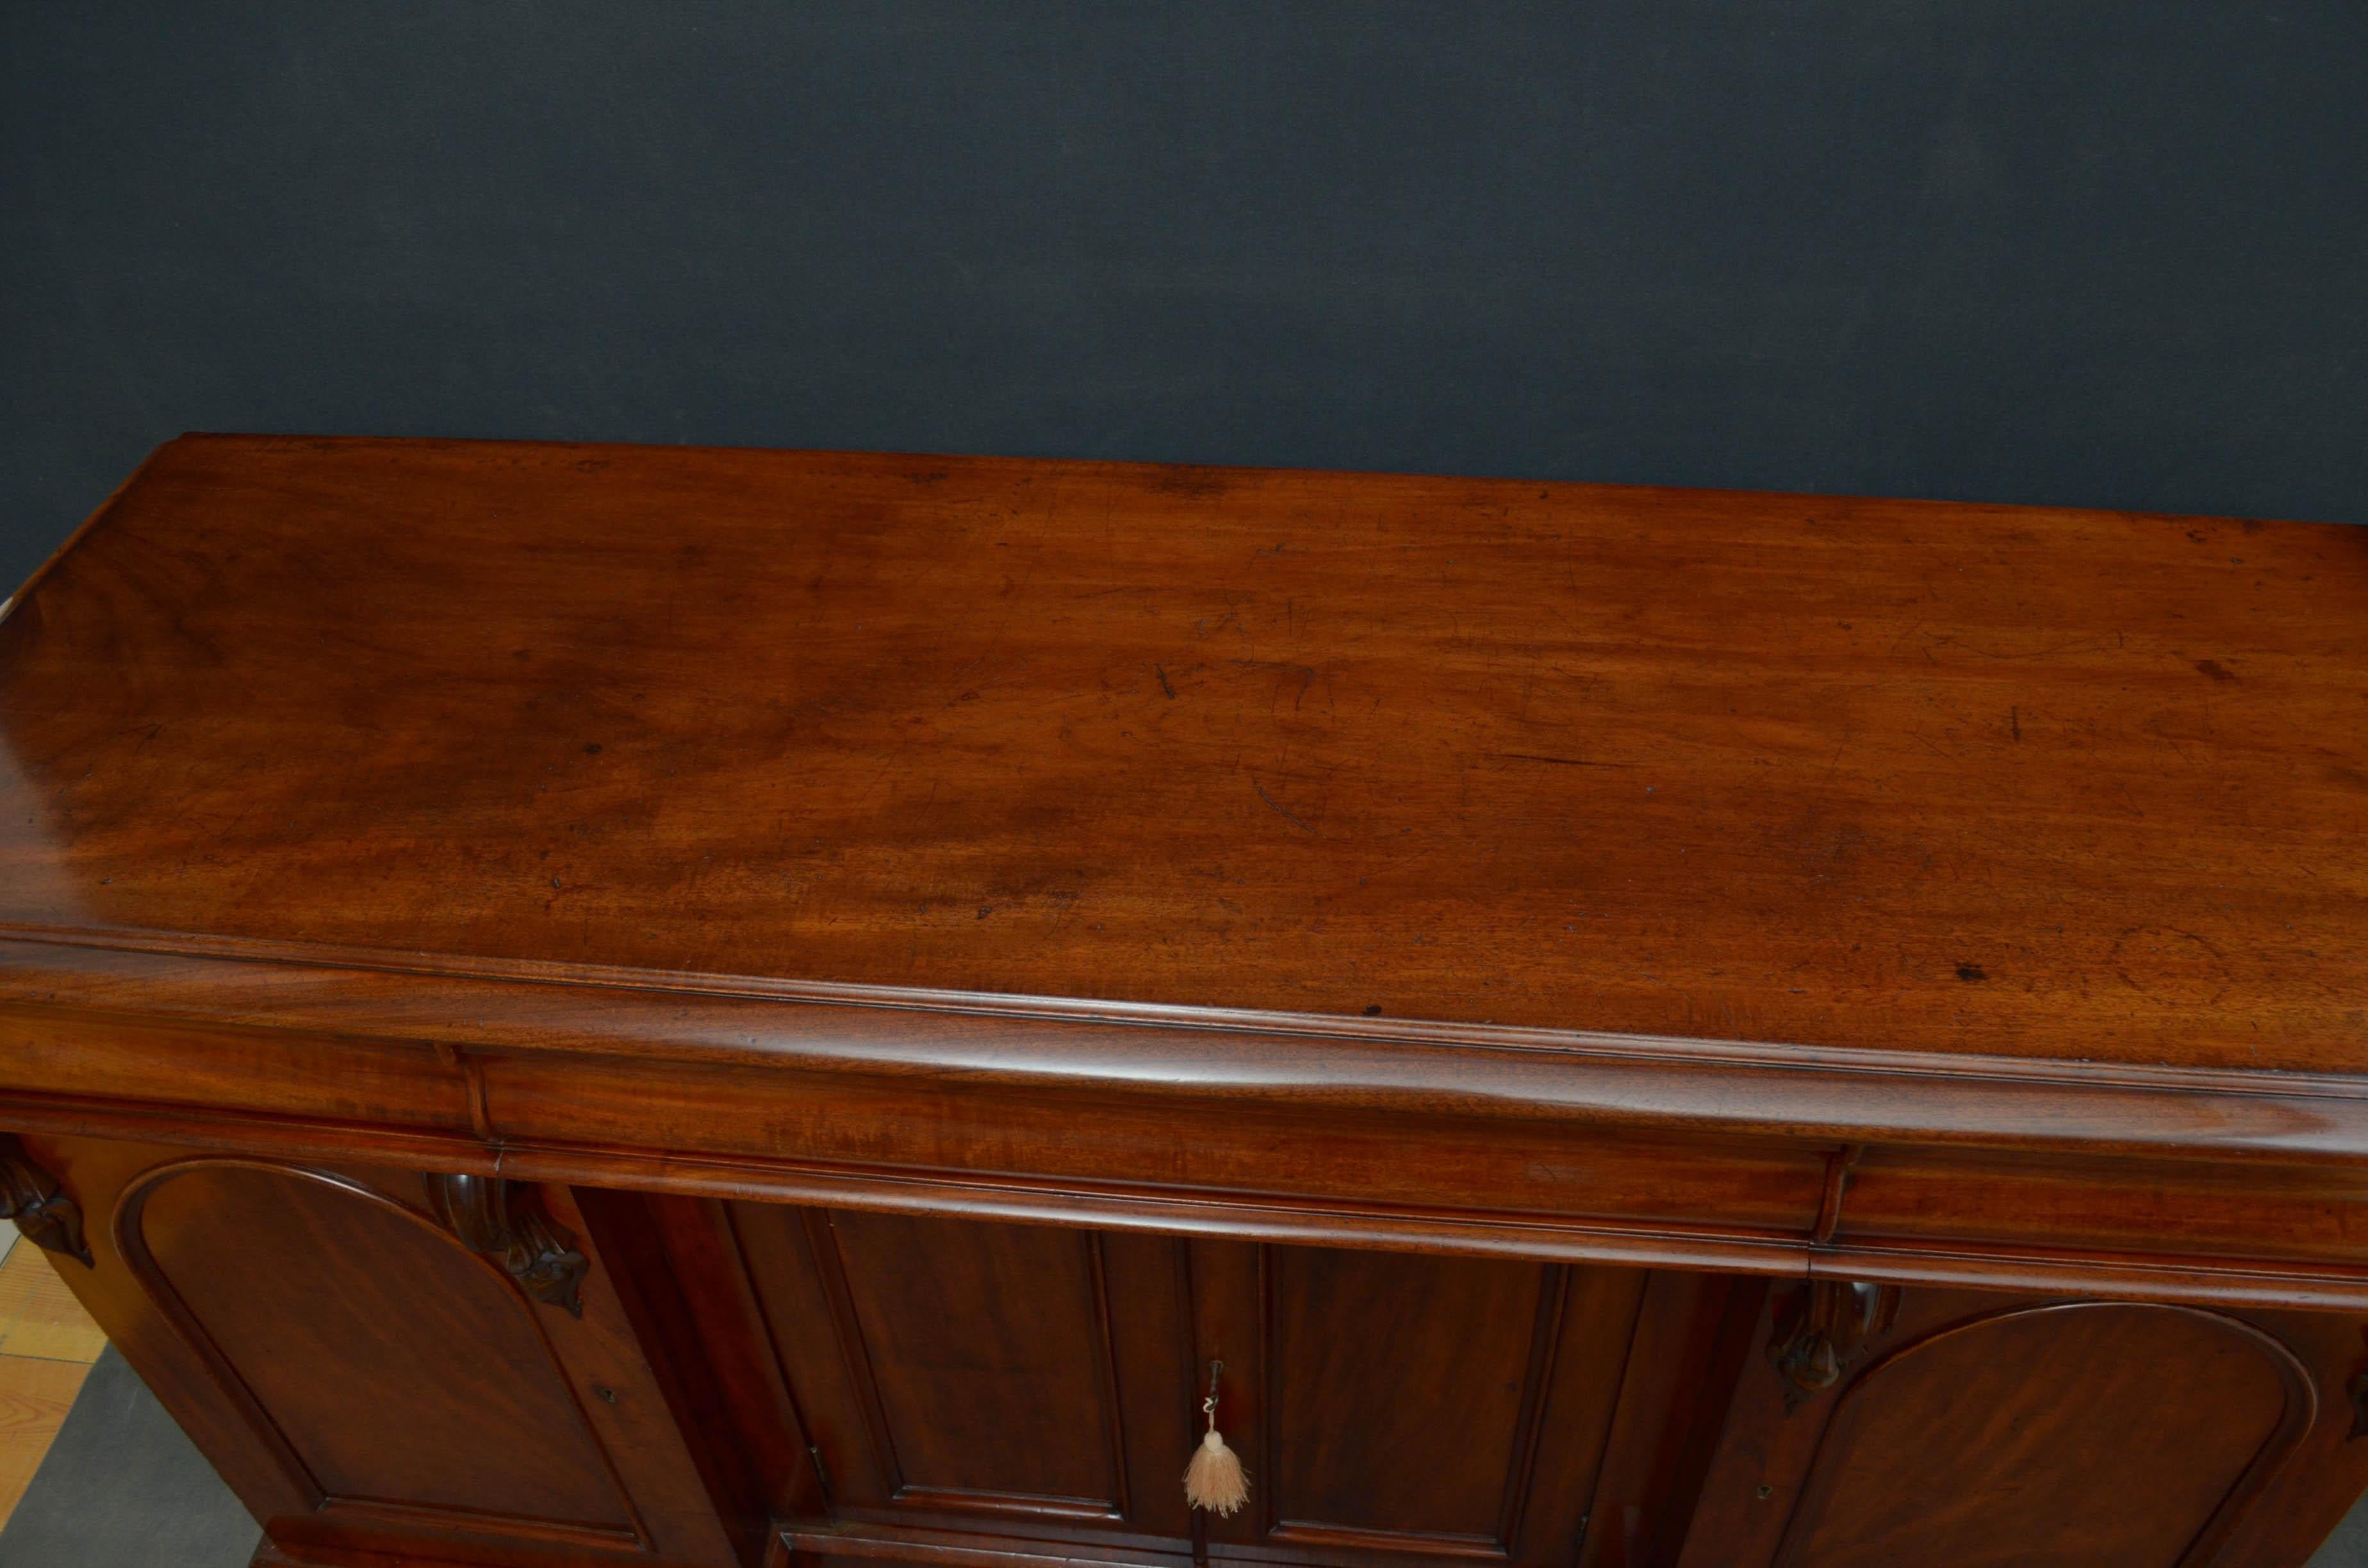 R00 Victorian 4-door sideboard in mahogany, having figured top above 3 shaped, mahogany lined drawers and arched and panelled cupboard doors enclosing a shelf, all flanked by further cabinet doors enclosing sliders and a shelf, all decorated with